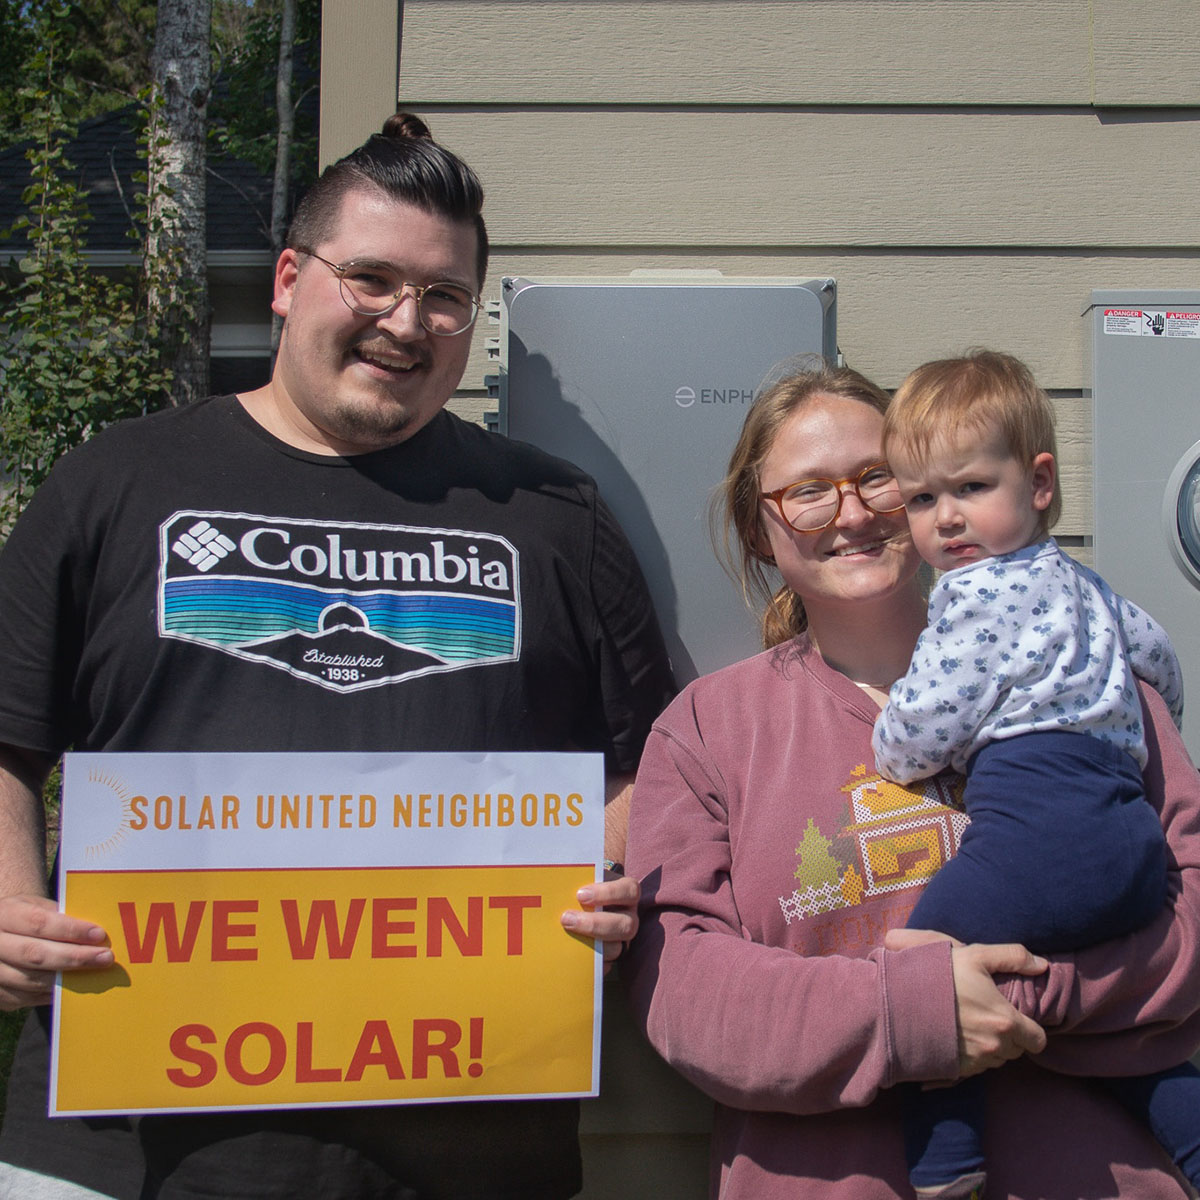 Man holding sign that reads "We went solar!" standing next to woman holding a baby.